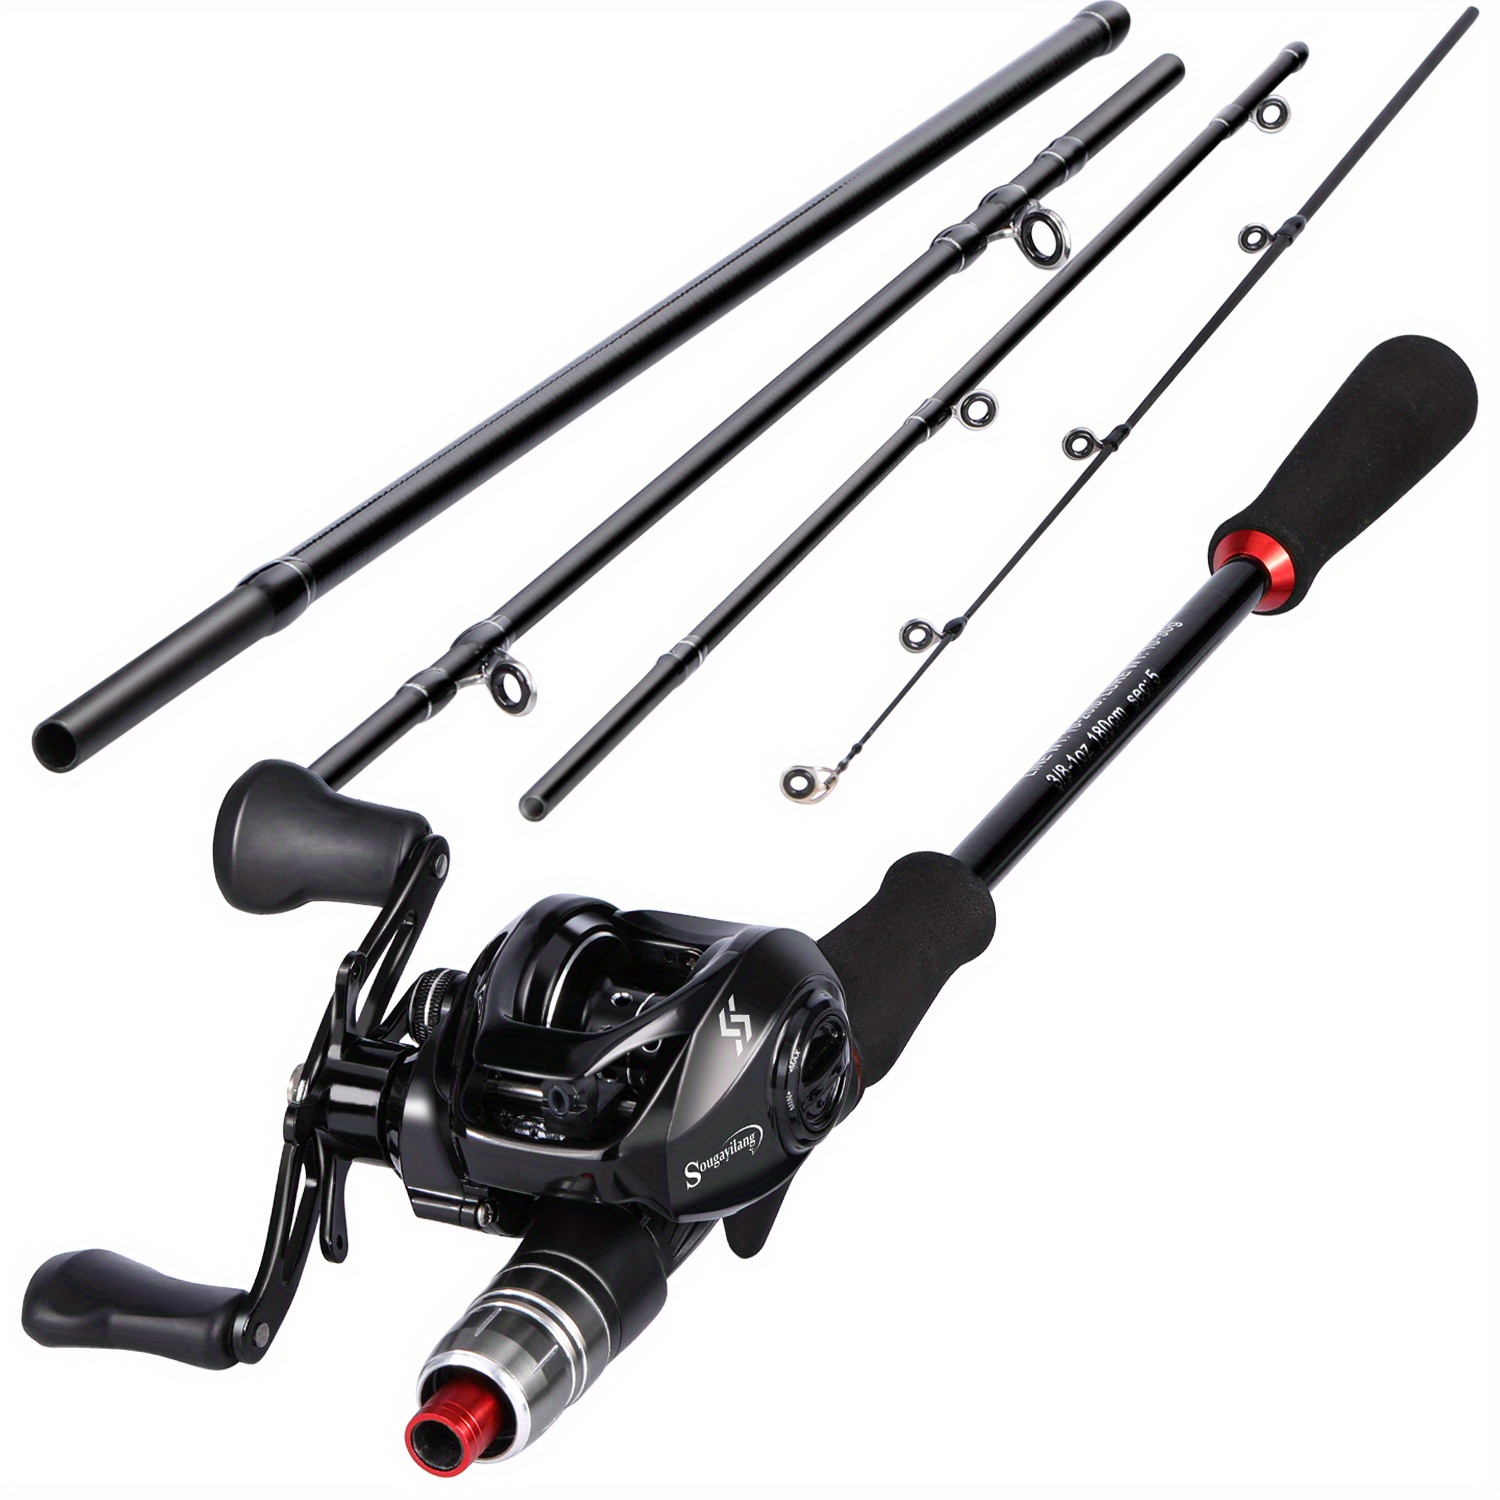 Cheap Fishing Rod and Reel Combos 1.8m/2.1n Baitcasting Fishing Pole with  17+1 BB Baitcasting Reel for Travel Fihsing